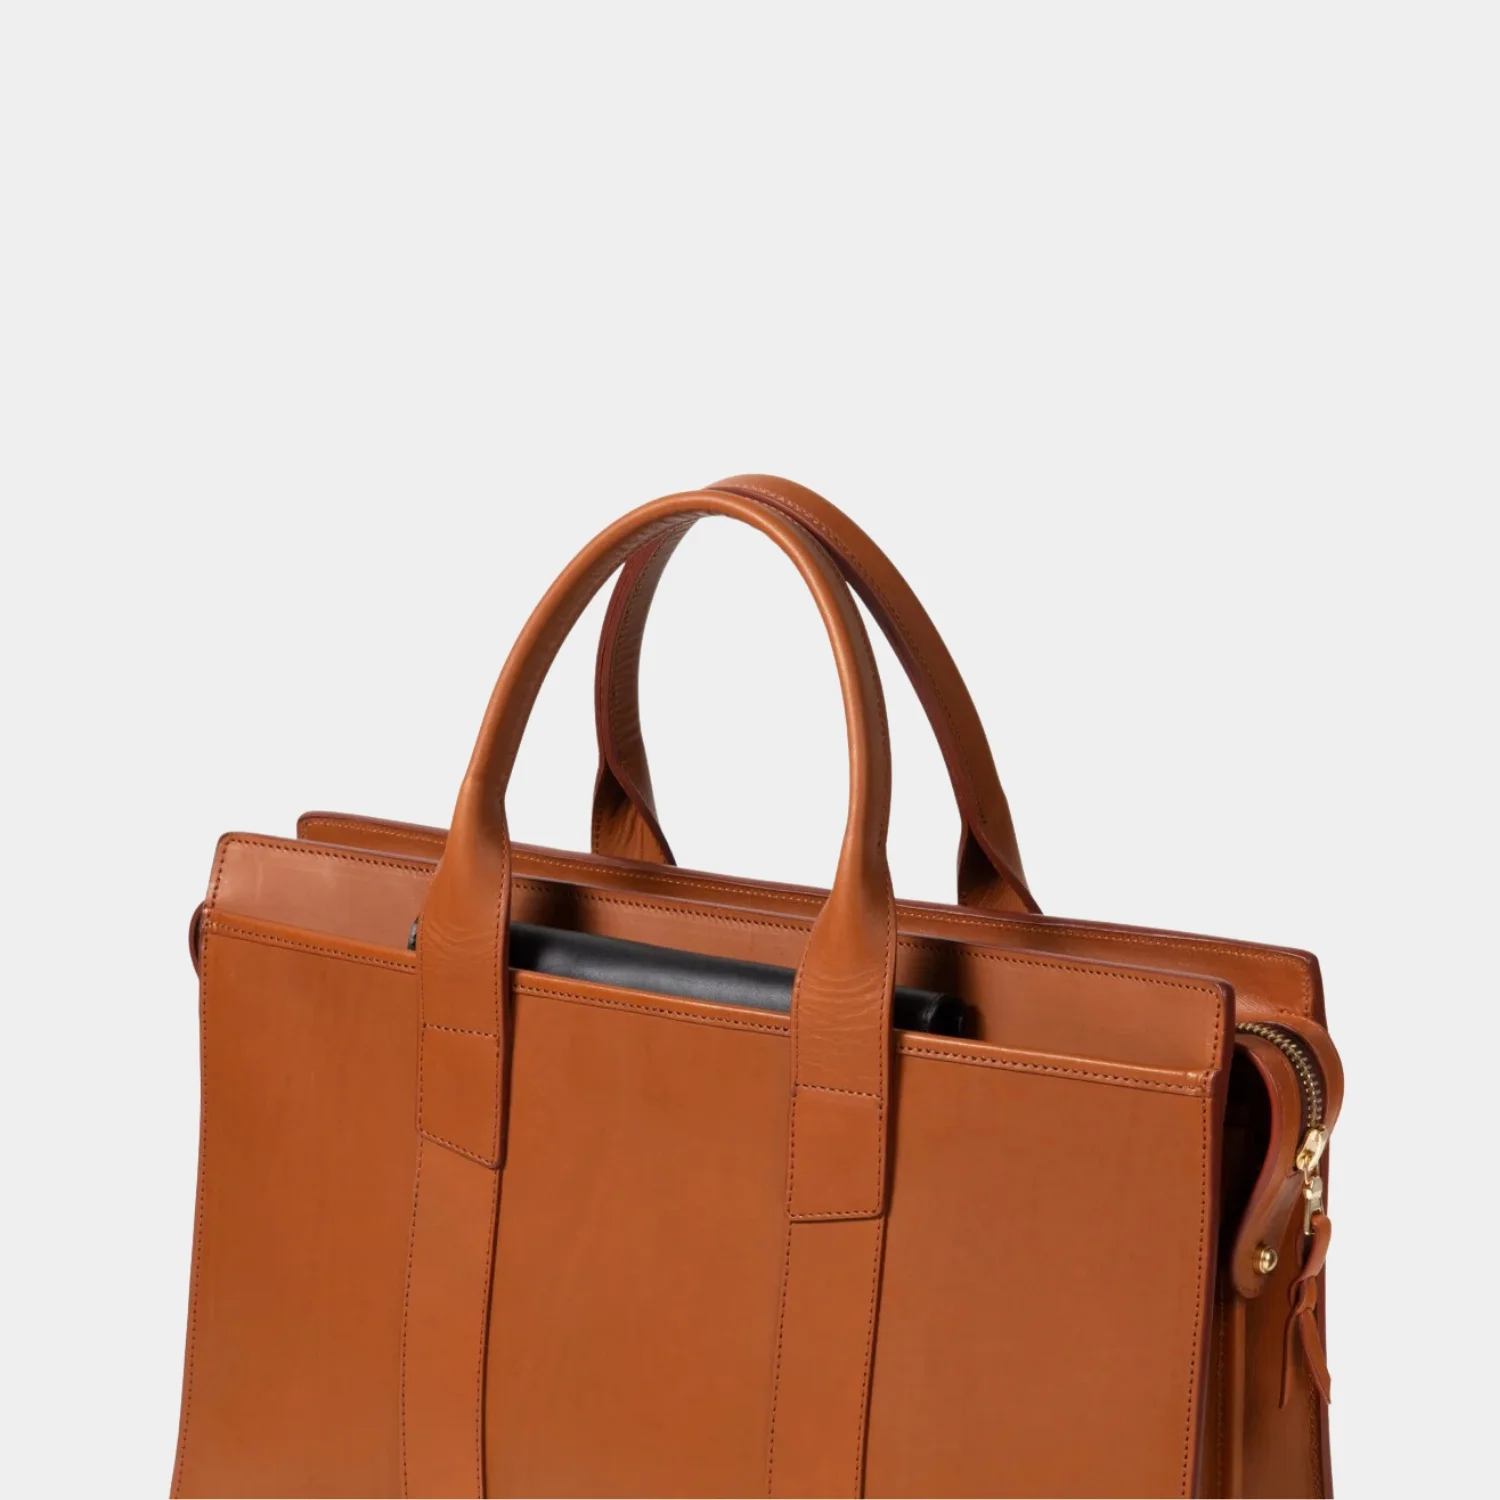 American Style Classy Tan Leather Laptop Briefcase Bag detailed image